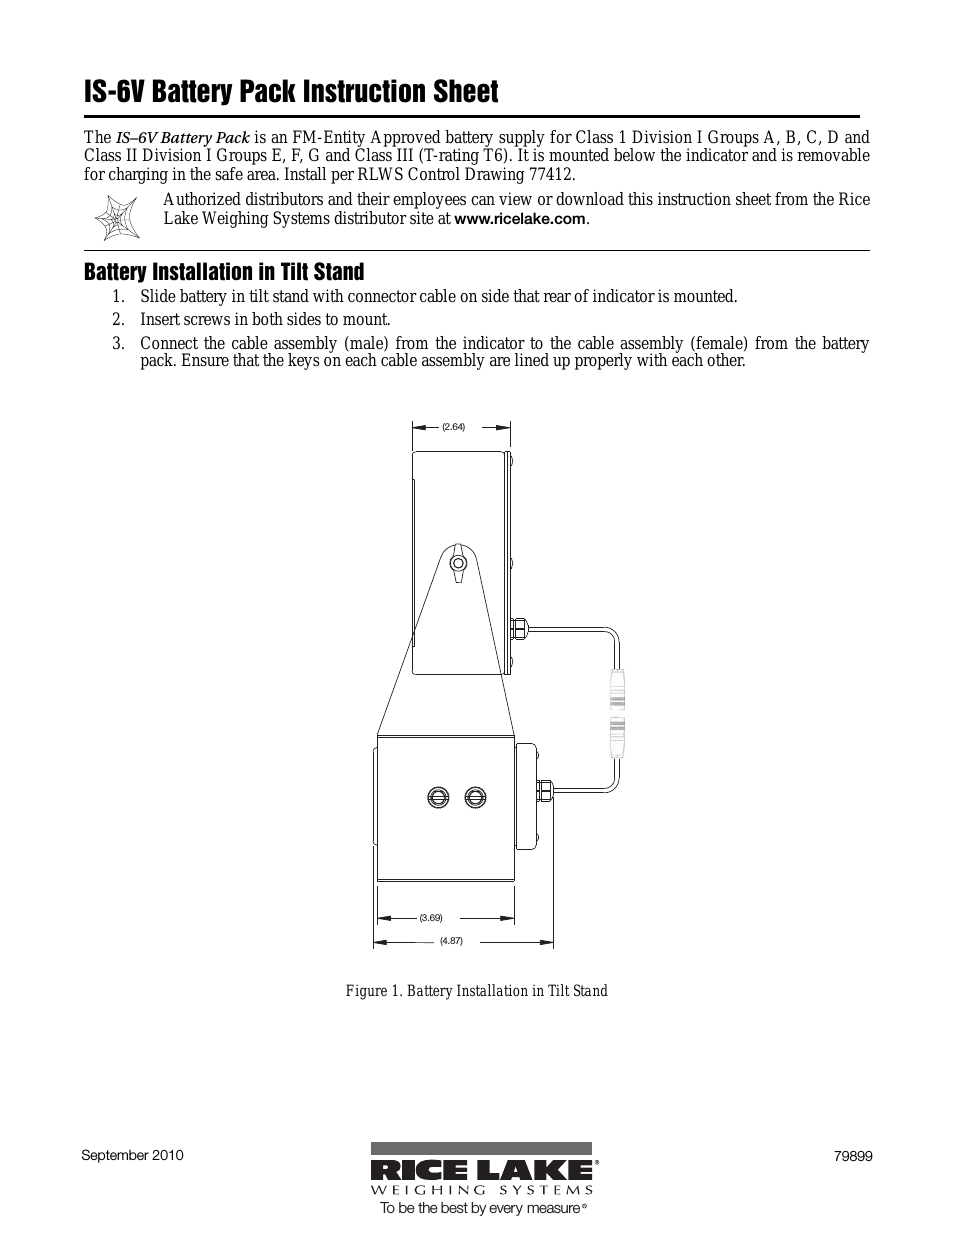 320IS Intrinsically-Safe Digital Weight Indicator - IS-6V Battery Pack Instruction Sheet